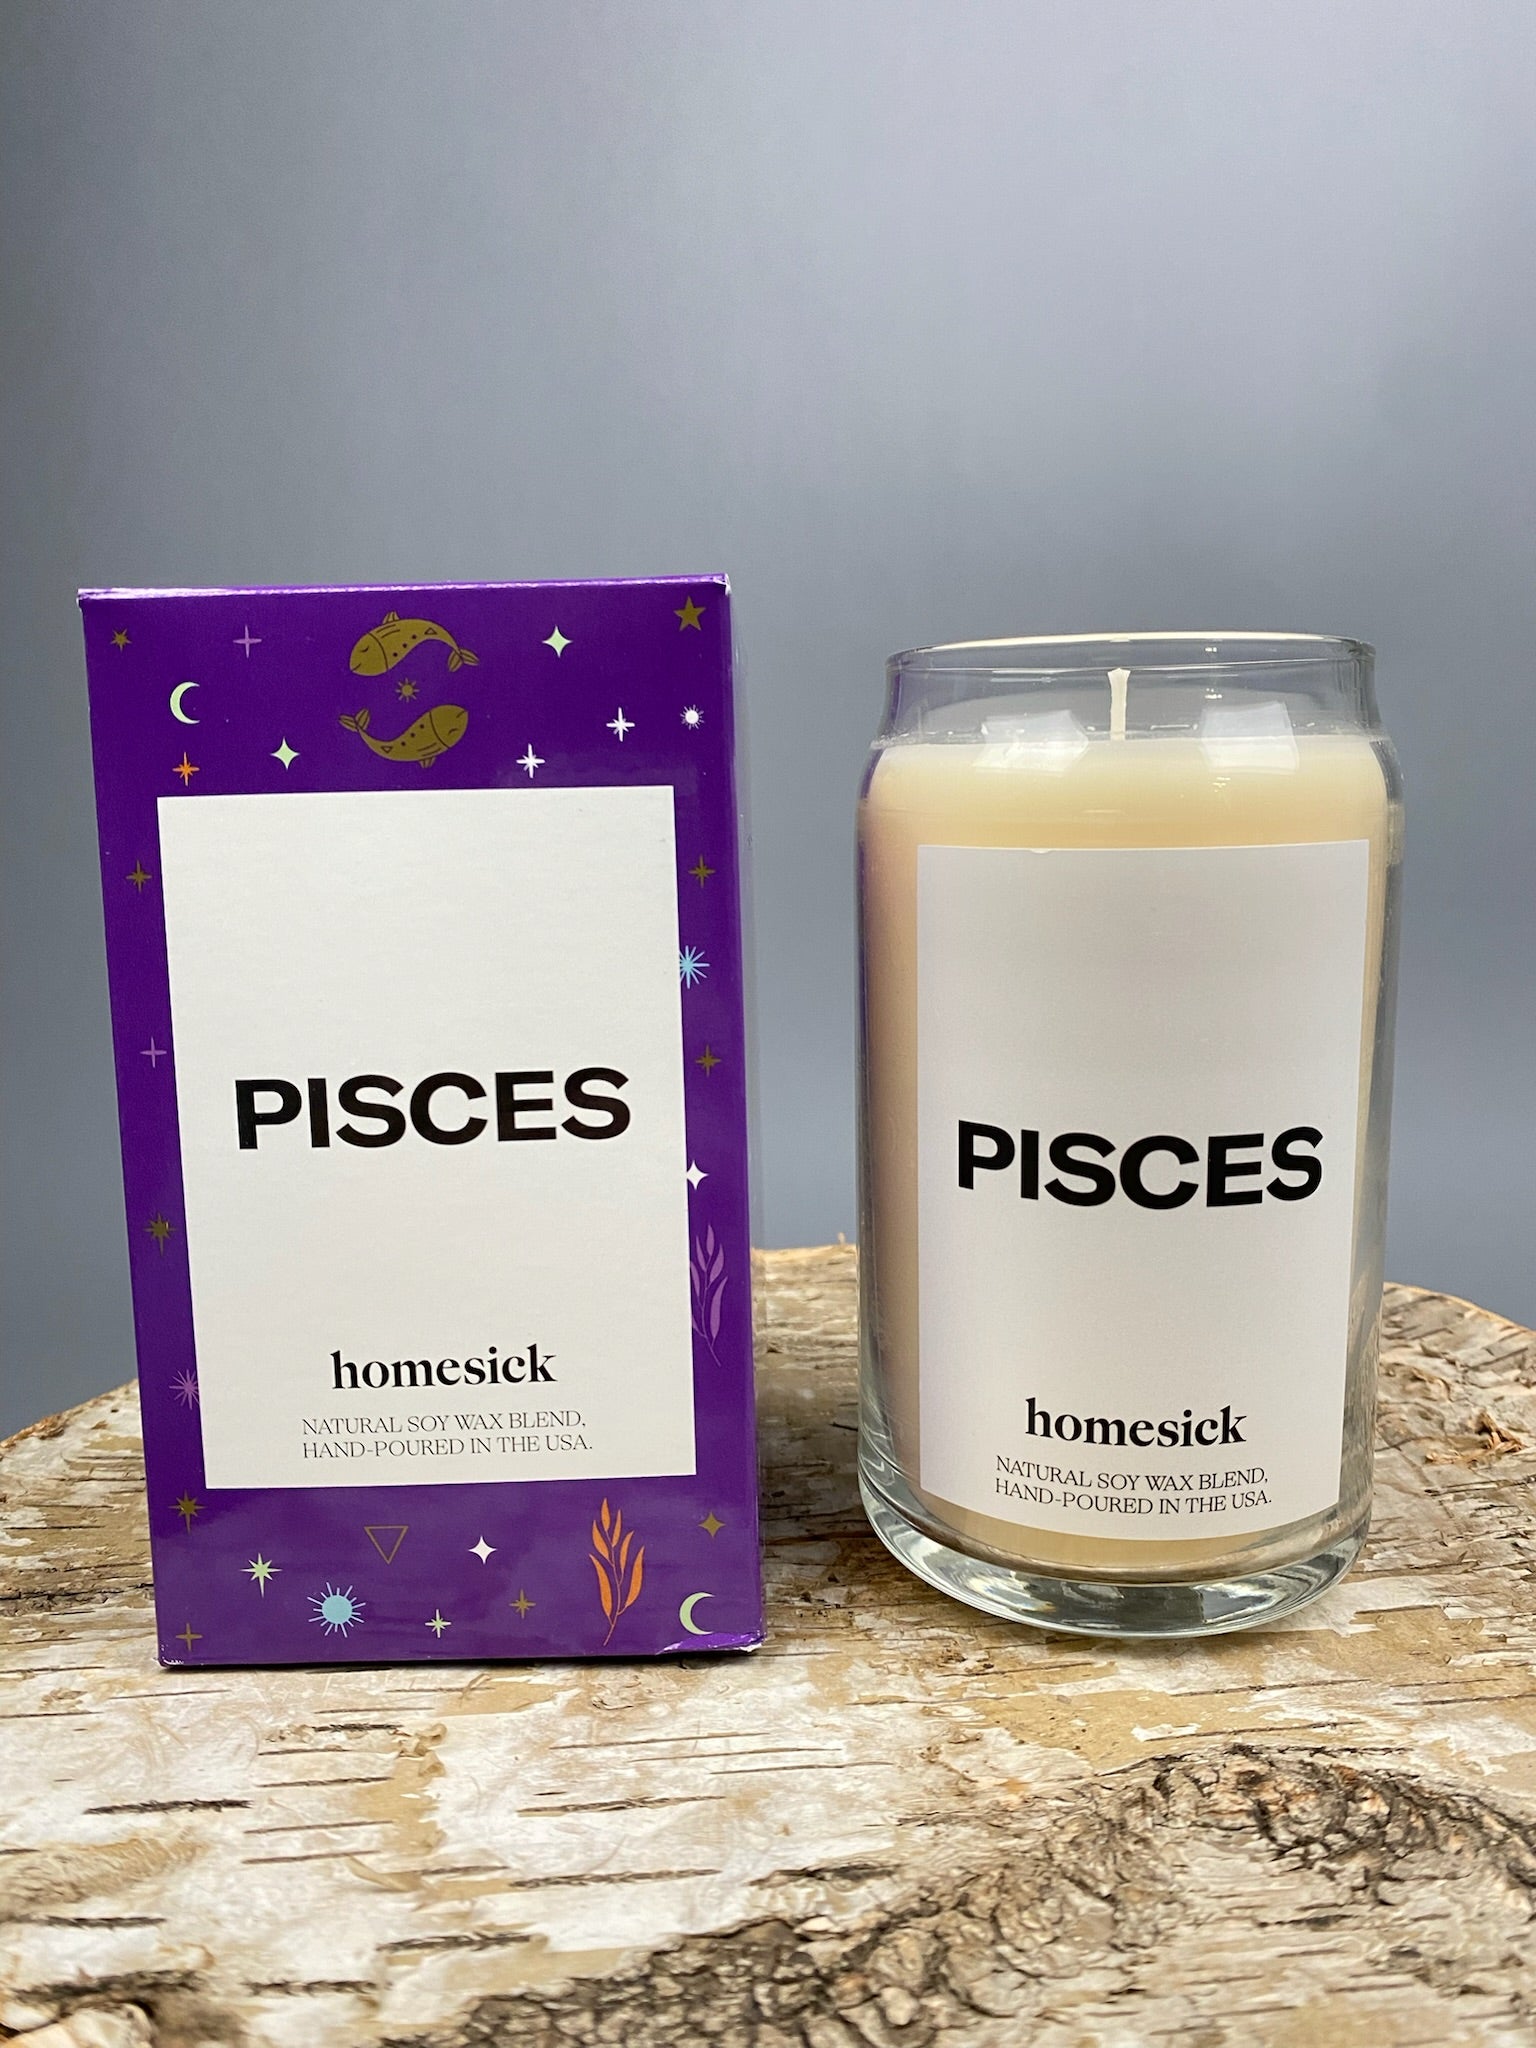 Homesick Pisces candle - Trendy Candles at Lush Fashion Lounge Boutique in Oklahoma City